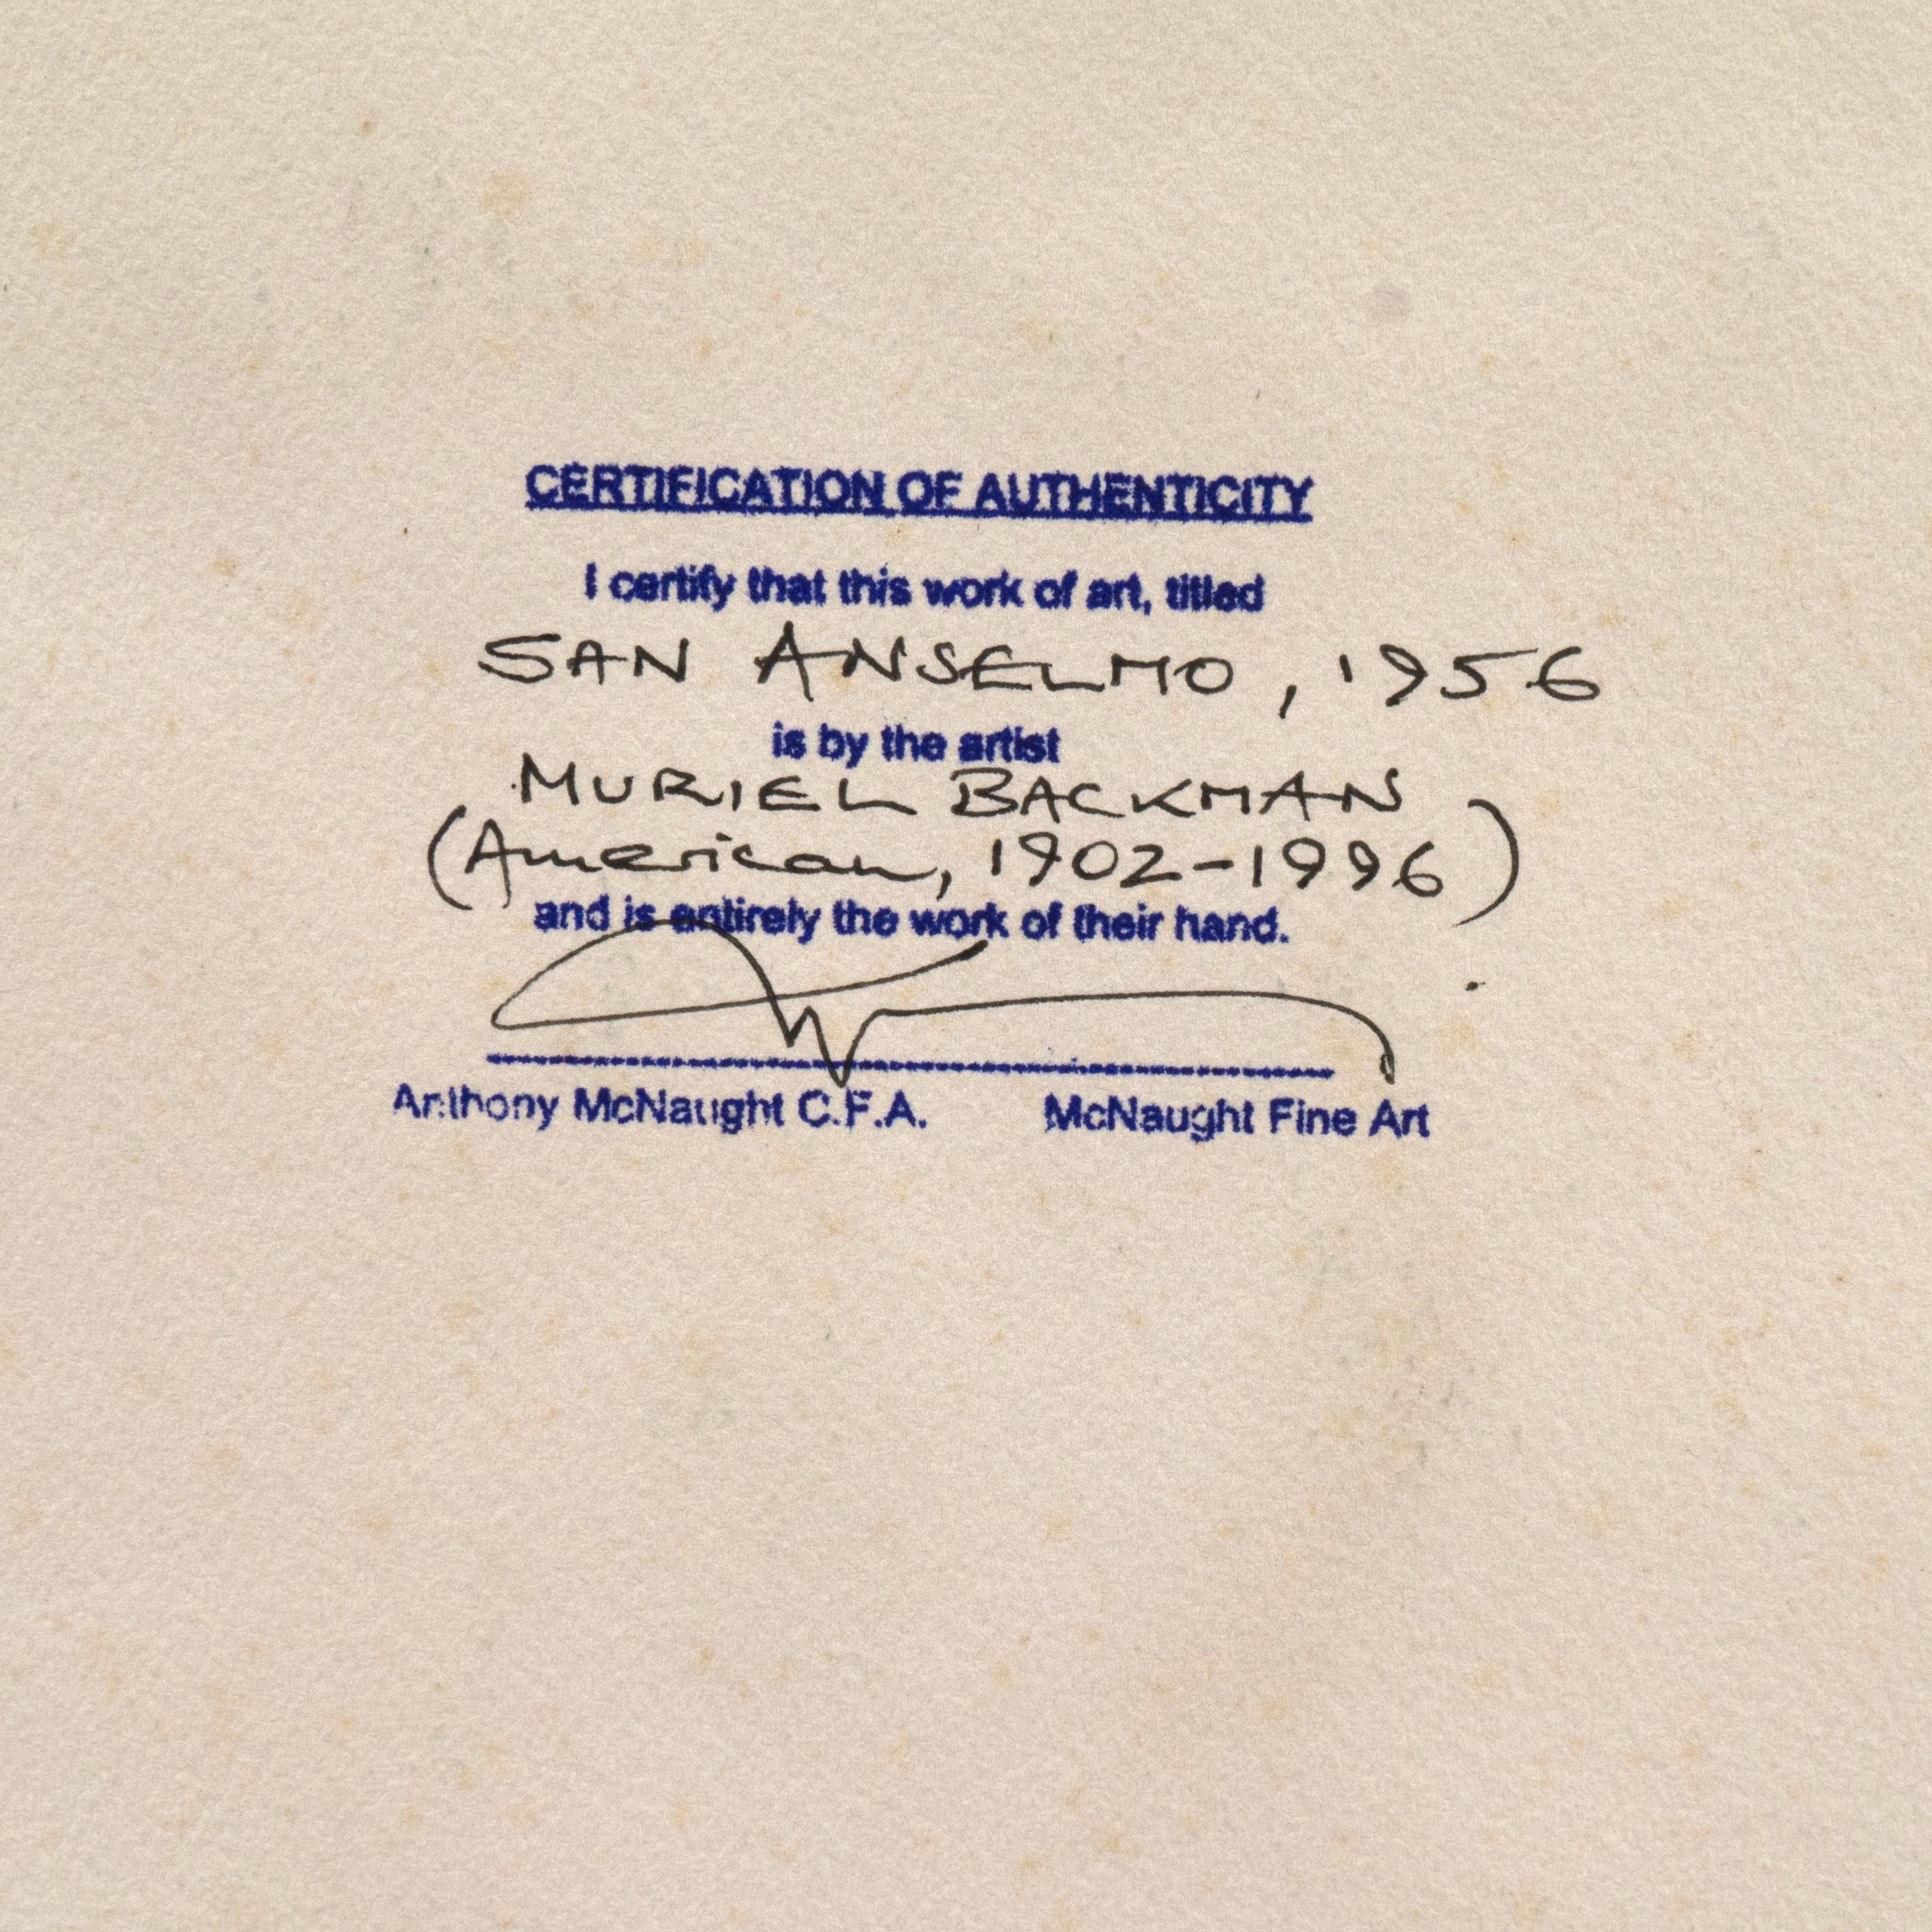 Certification of Authenticity stamped verso; titled verso, 'San Anselmo' and dated 1956.

Muriel Backman exhibited widely and with success from the 1930's through the 1950's, including at the Crocker Art Museum, the Kingsley Art Club, the Berkeley